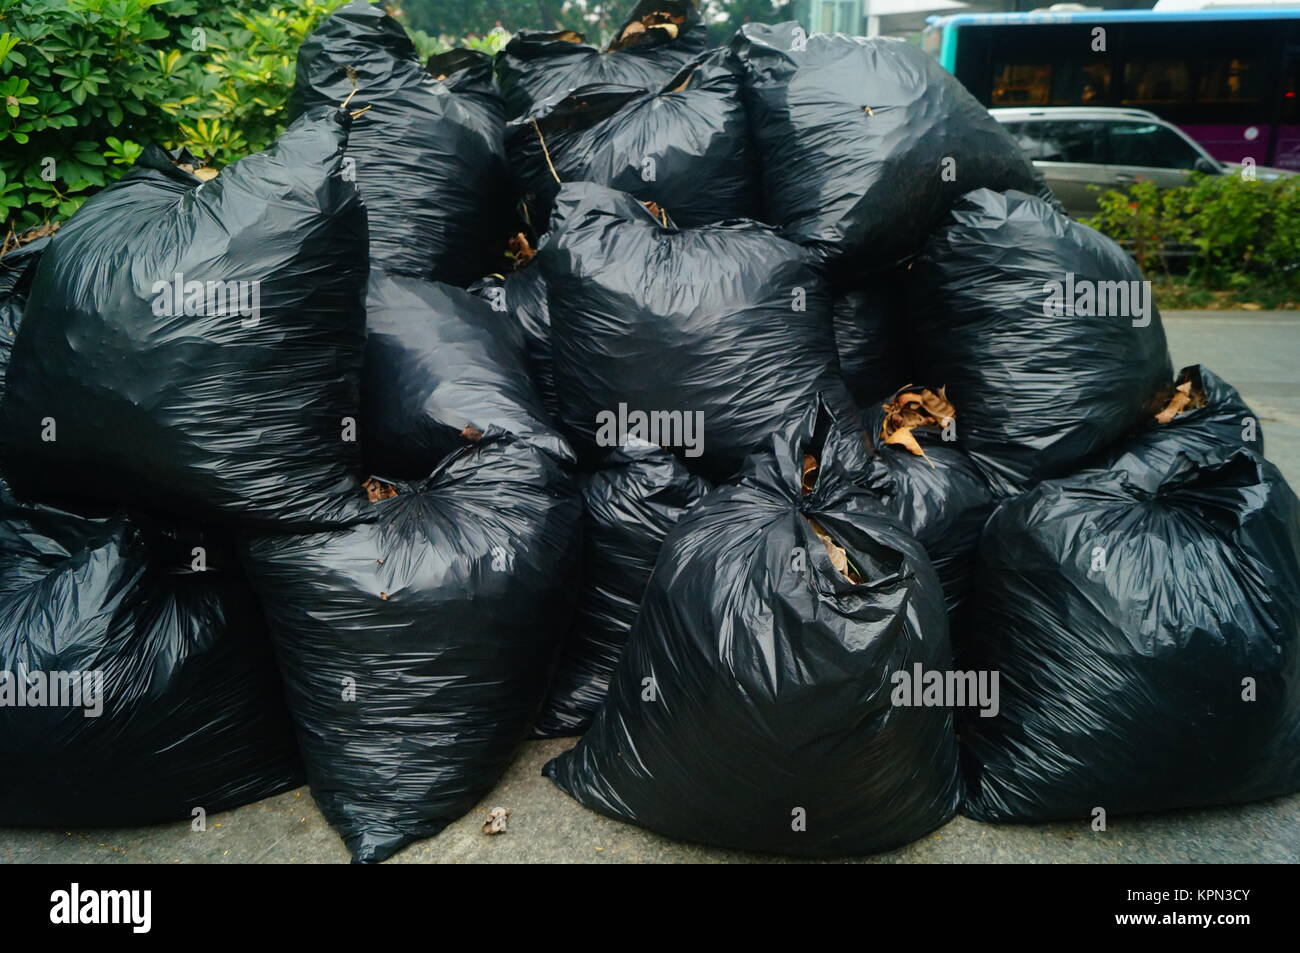 https://c8.alamy.com/comp/KPN3CY/black-plastic-bags-filled-with-garbage-heaps-of-heaps-on-the-city-KPN3CY.jpg